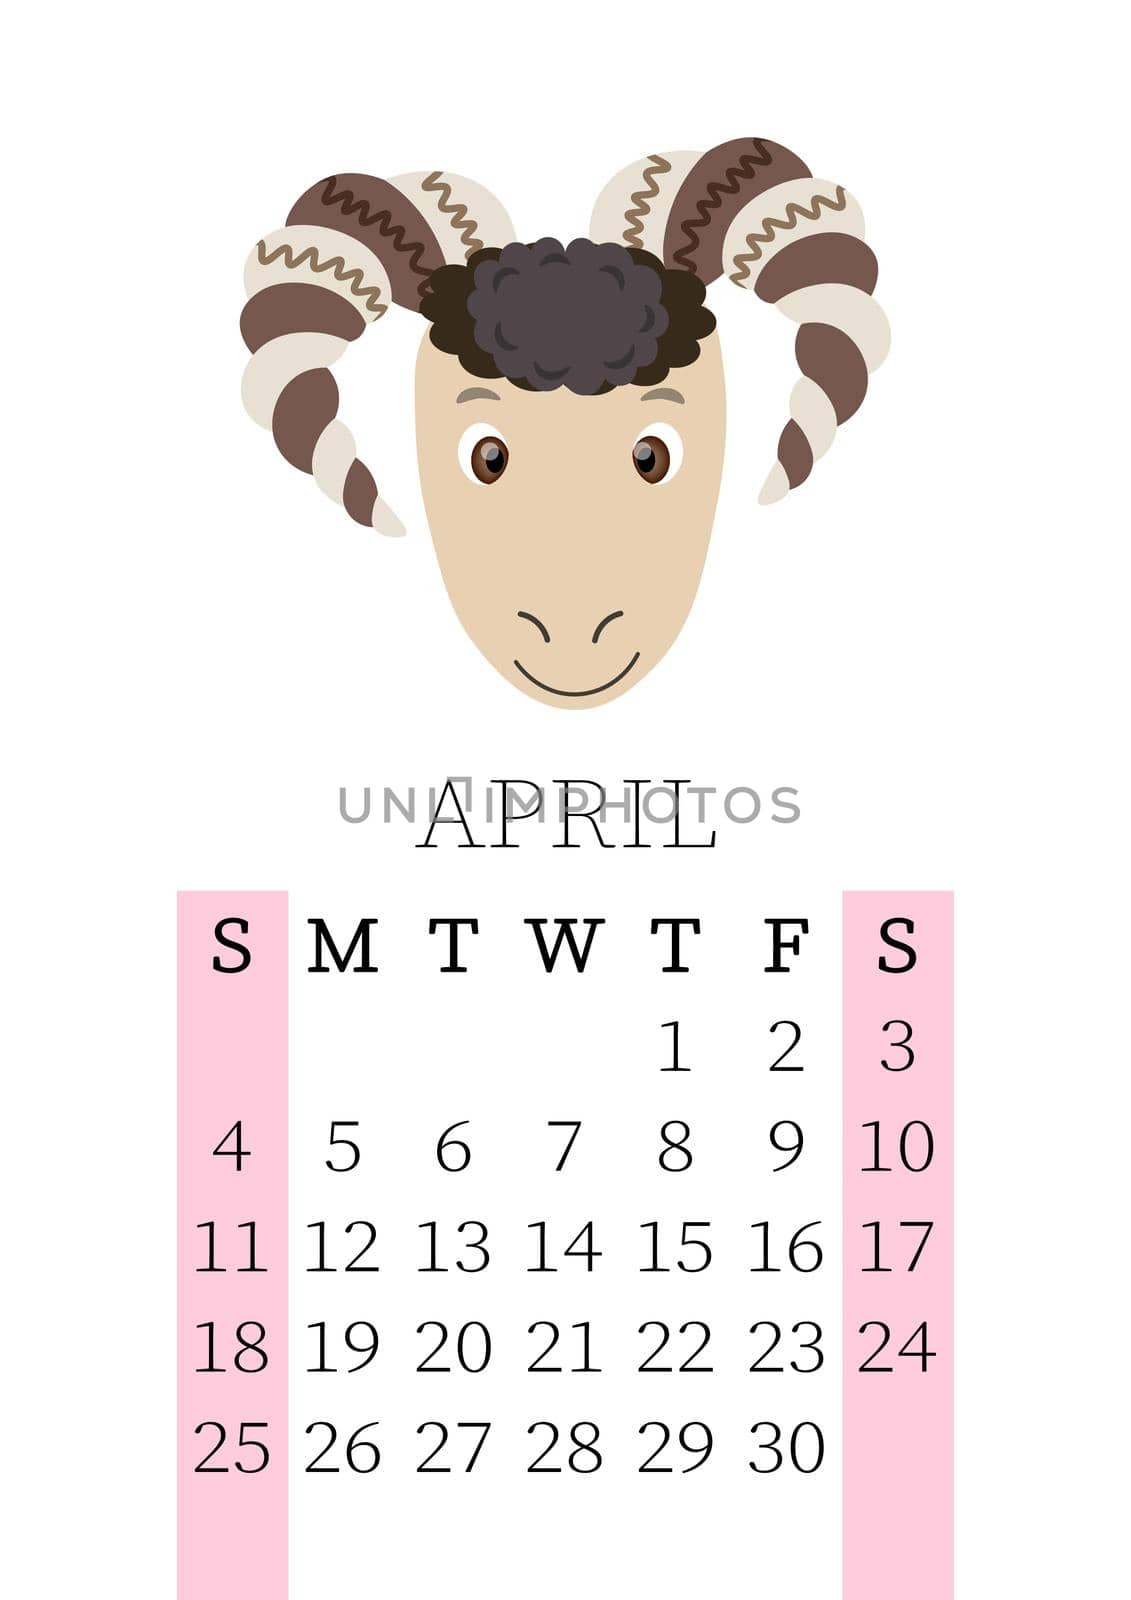 Calendar 2021. Monthly calendar for April 2021 from Sunday to Saturday. Yearly Planner. Templates with cute hand drawn face animals. Vector illustration. Great for kids. Calendar page for print.